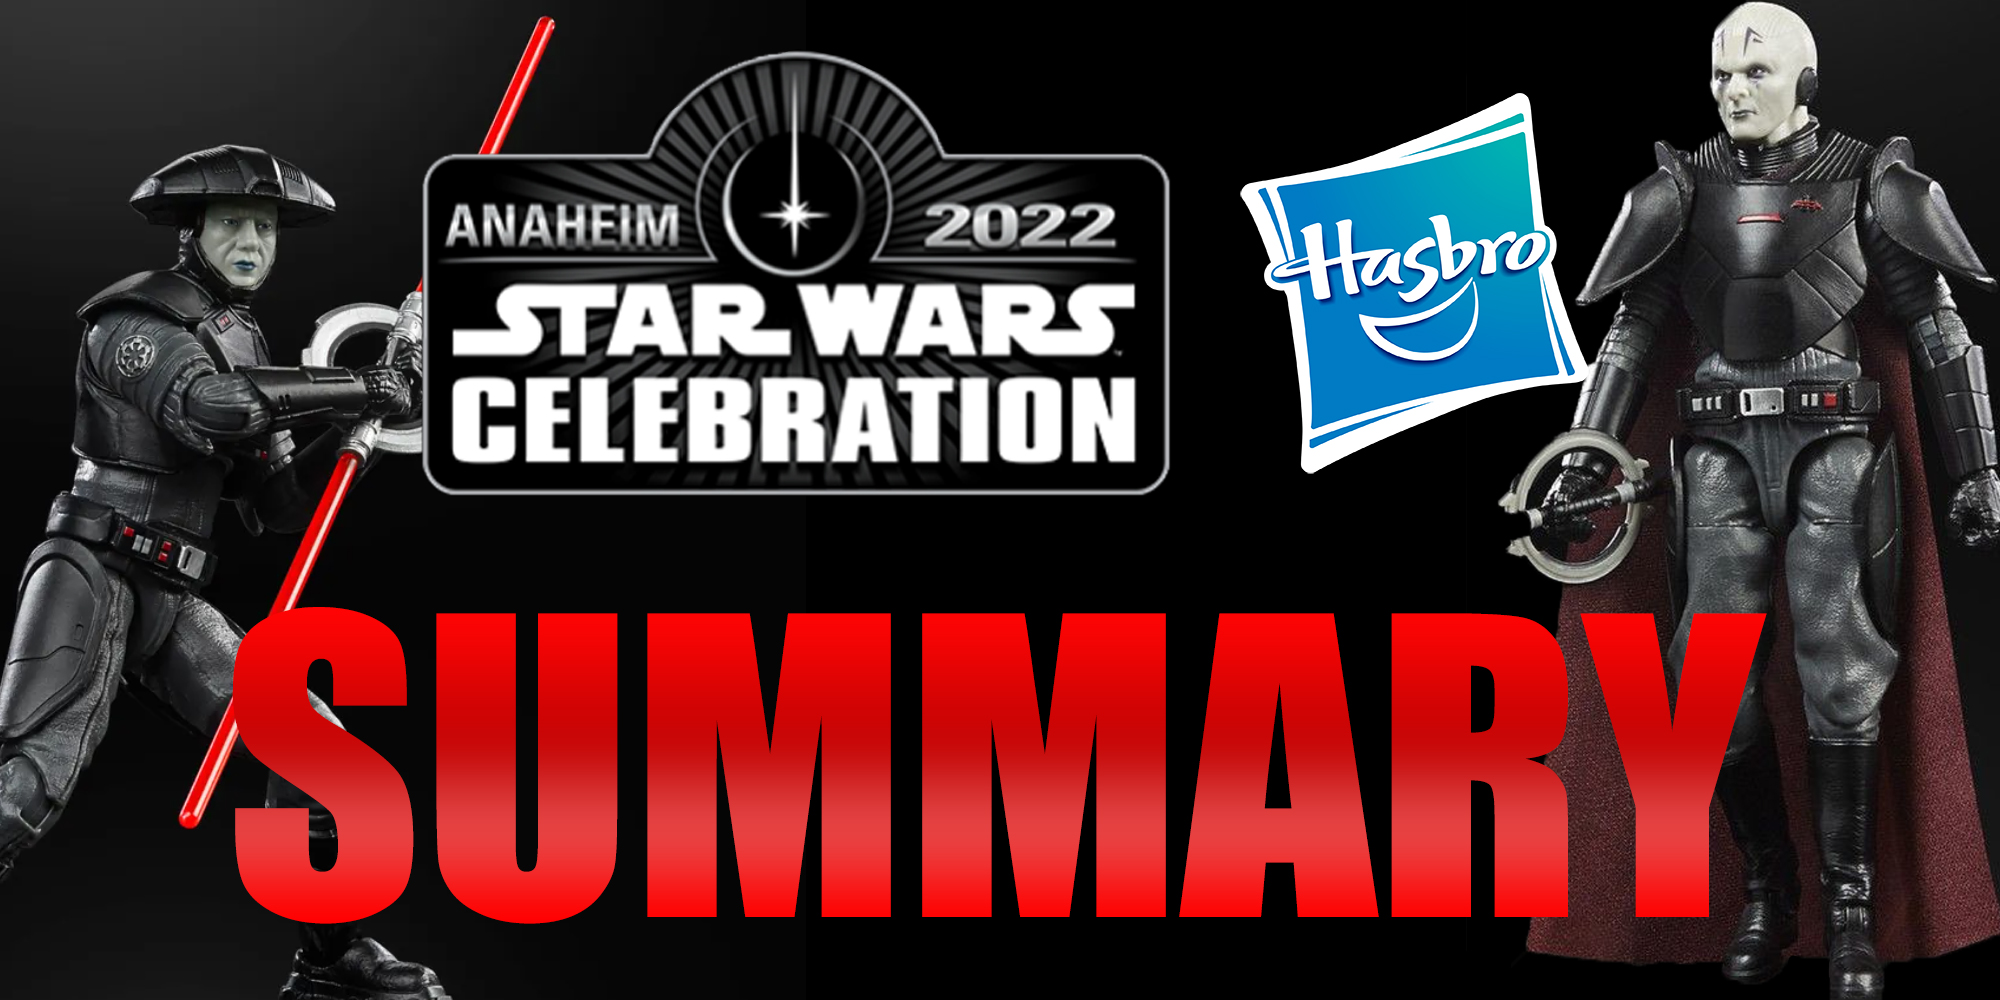 SWCA 2022 Star Wars Action figure announcements